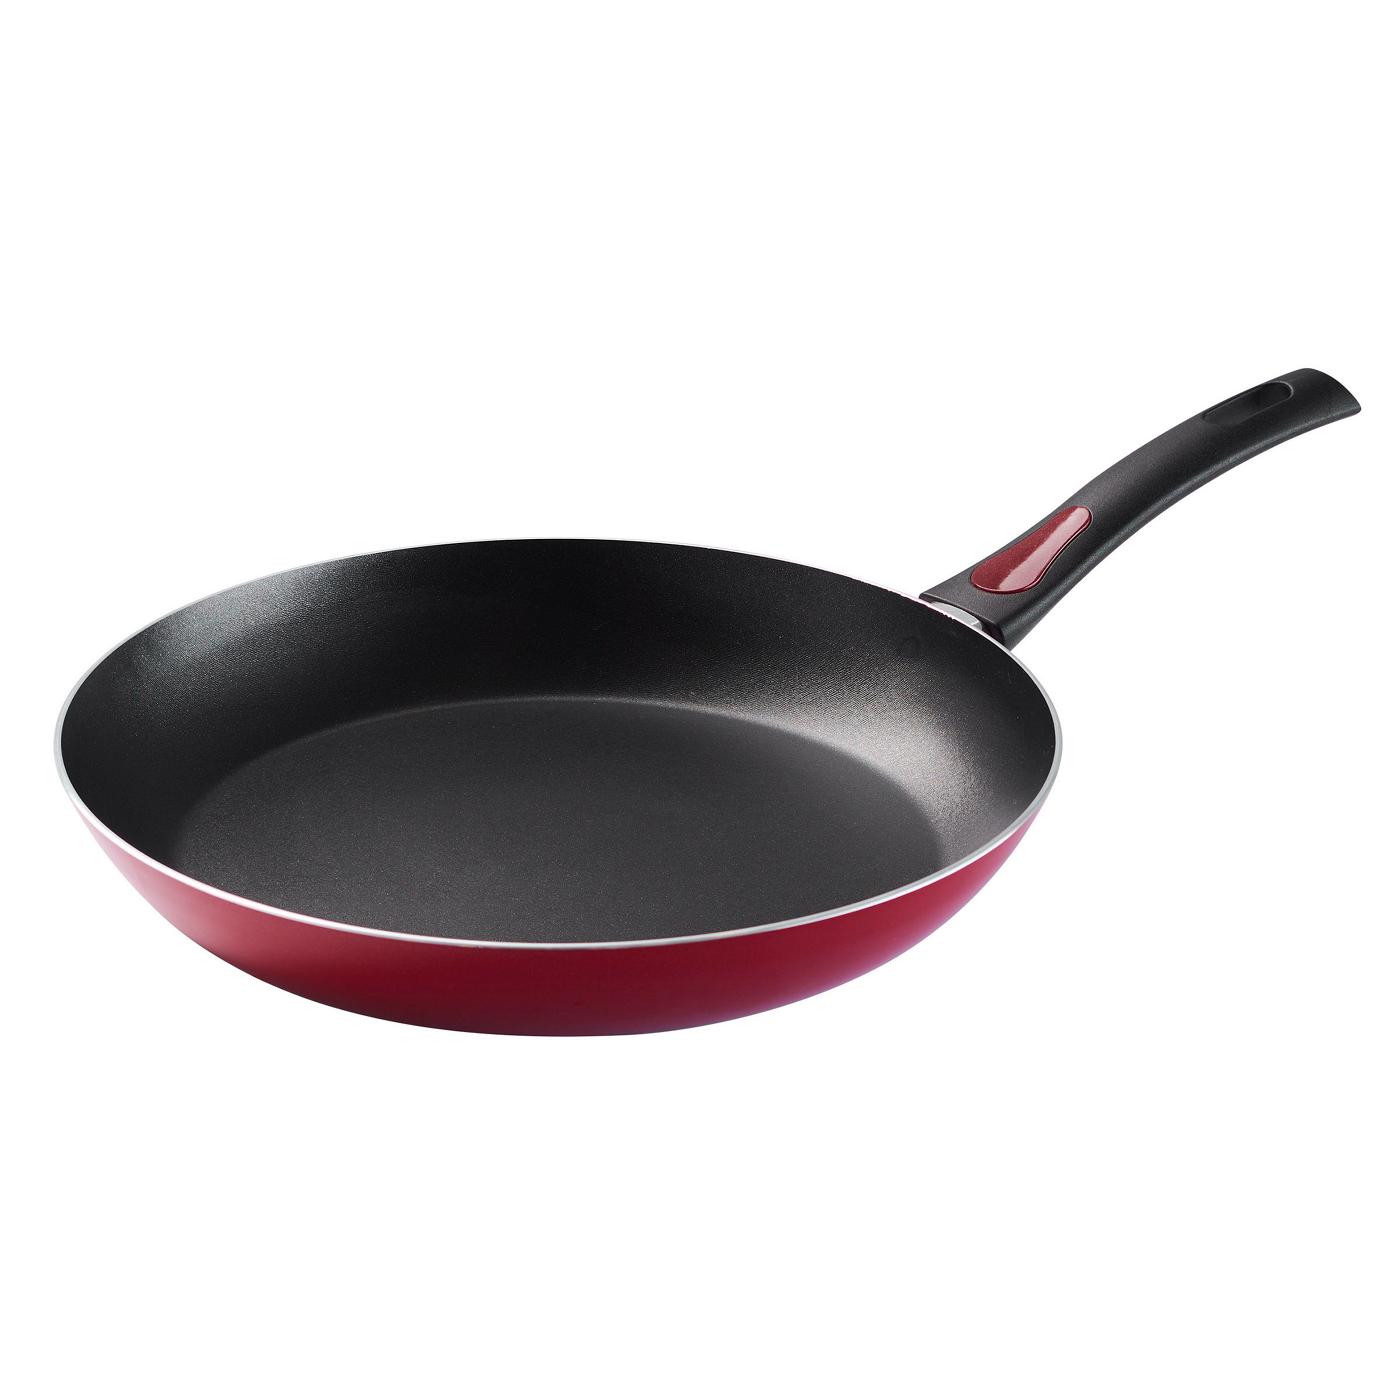 Tramontina Non-Stick Red Covered Pan with Steamer Insert - Shop Stock Pots  & Sauce Pans at H-E-B